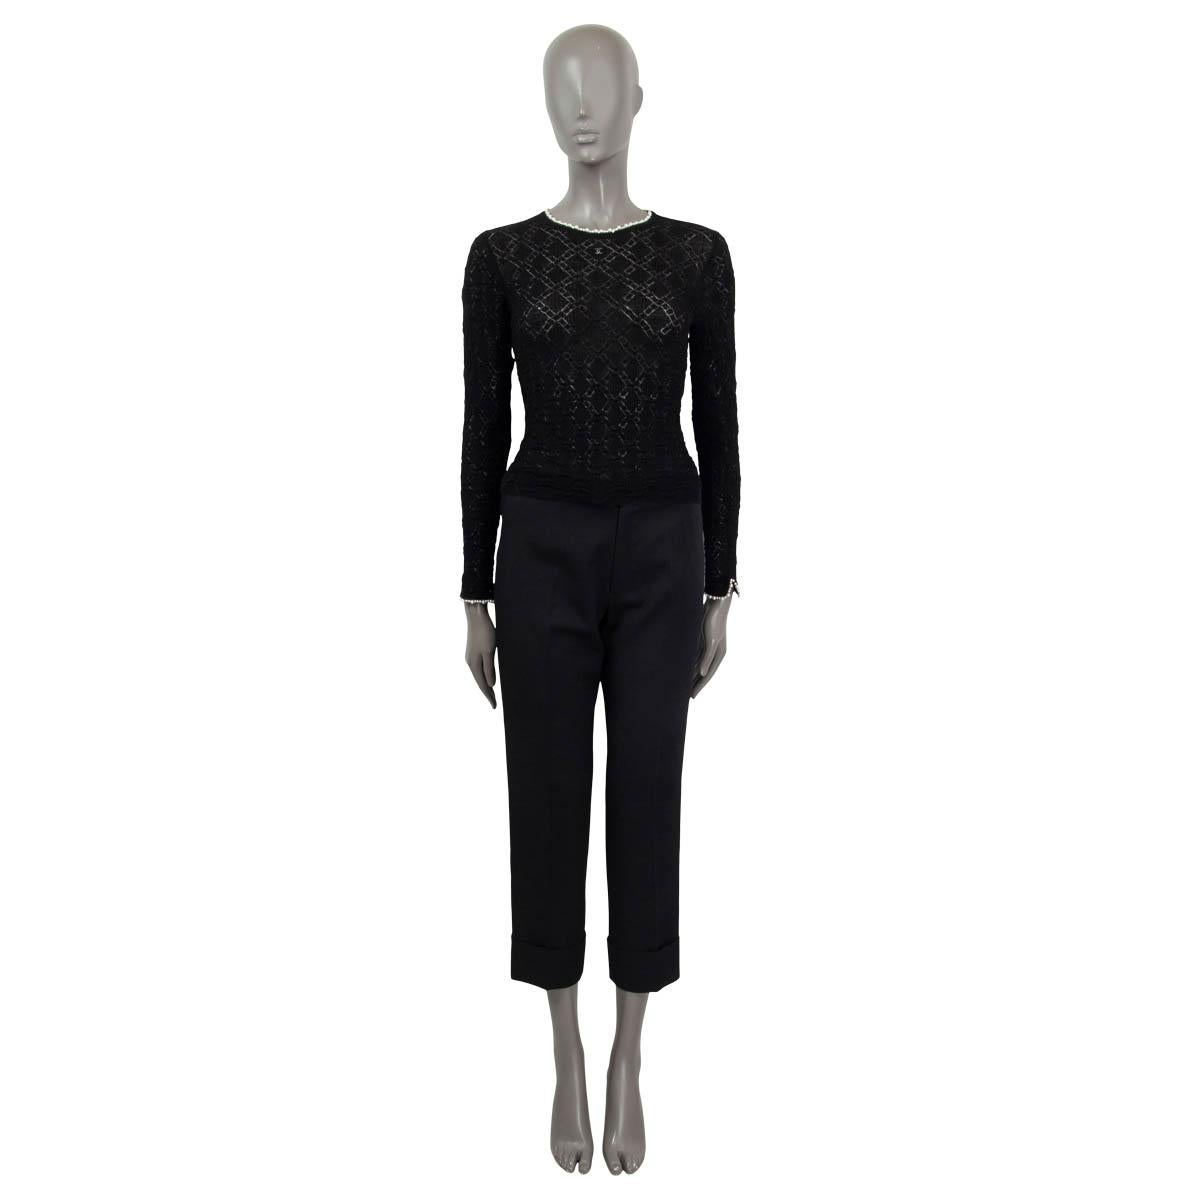 100% authentic Chanel Pre-Fall 2022 semi sheer long sleeve shirt in black virgin wool (100%). Features a faux pearl trim and a crystal 'CC' emblem on the front. Unlined. Has been worn once and is in virtually new